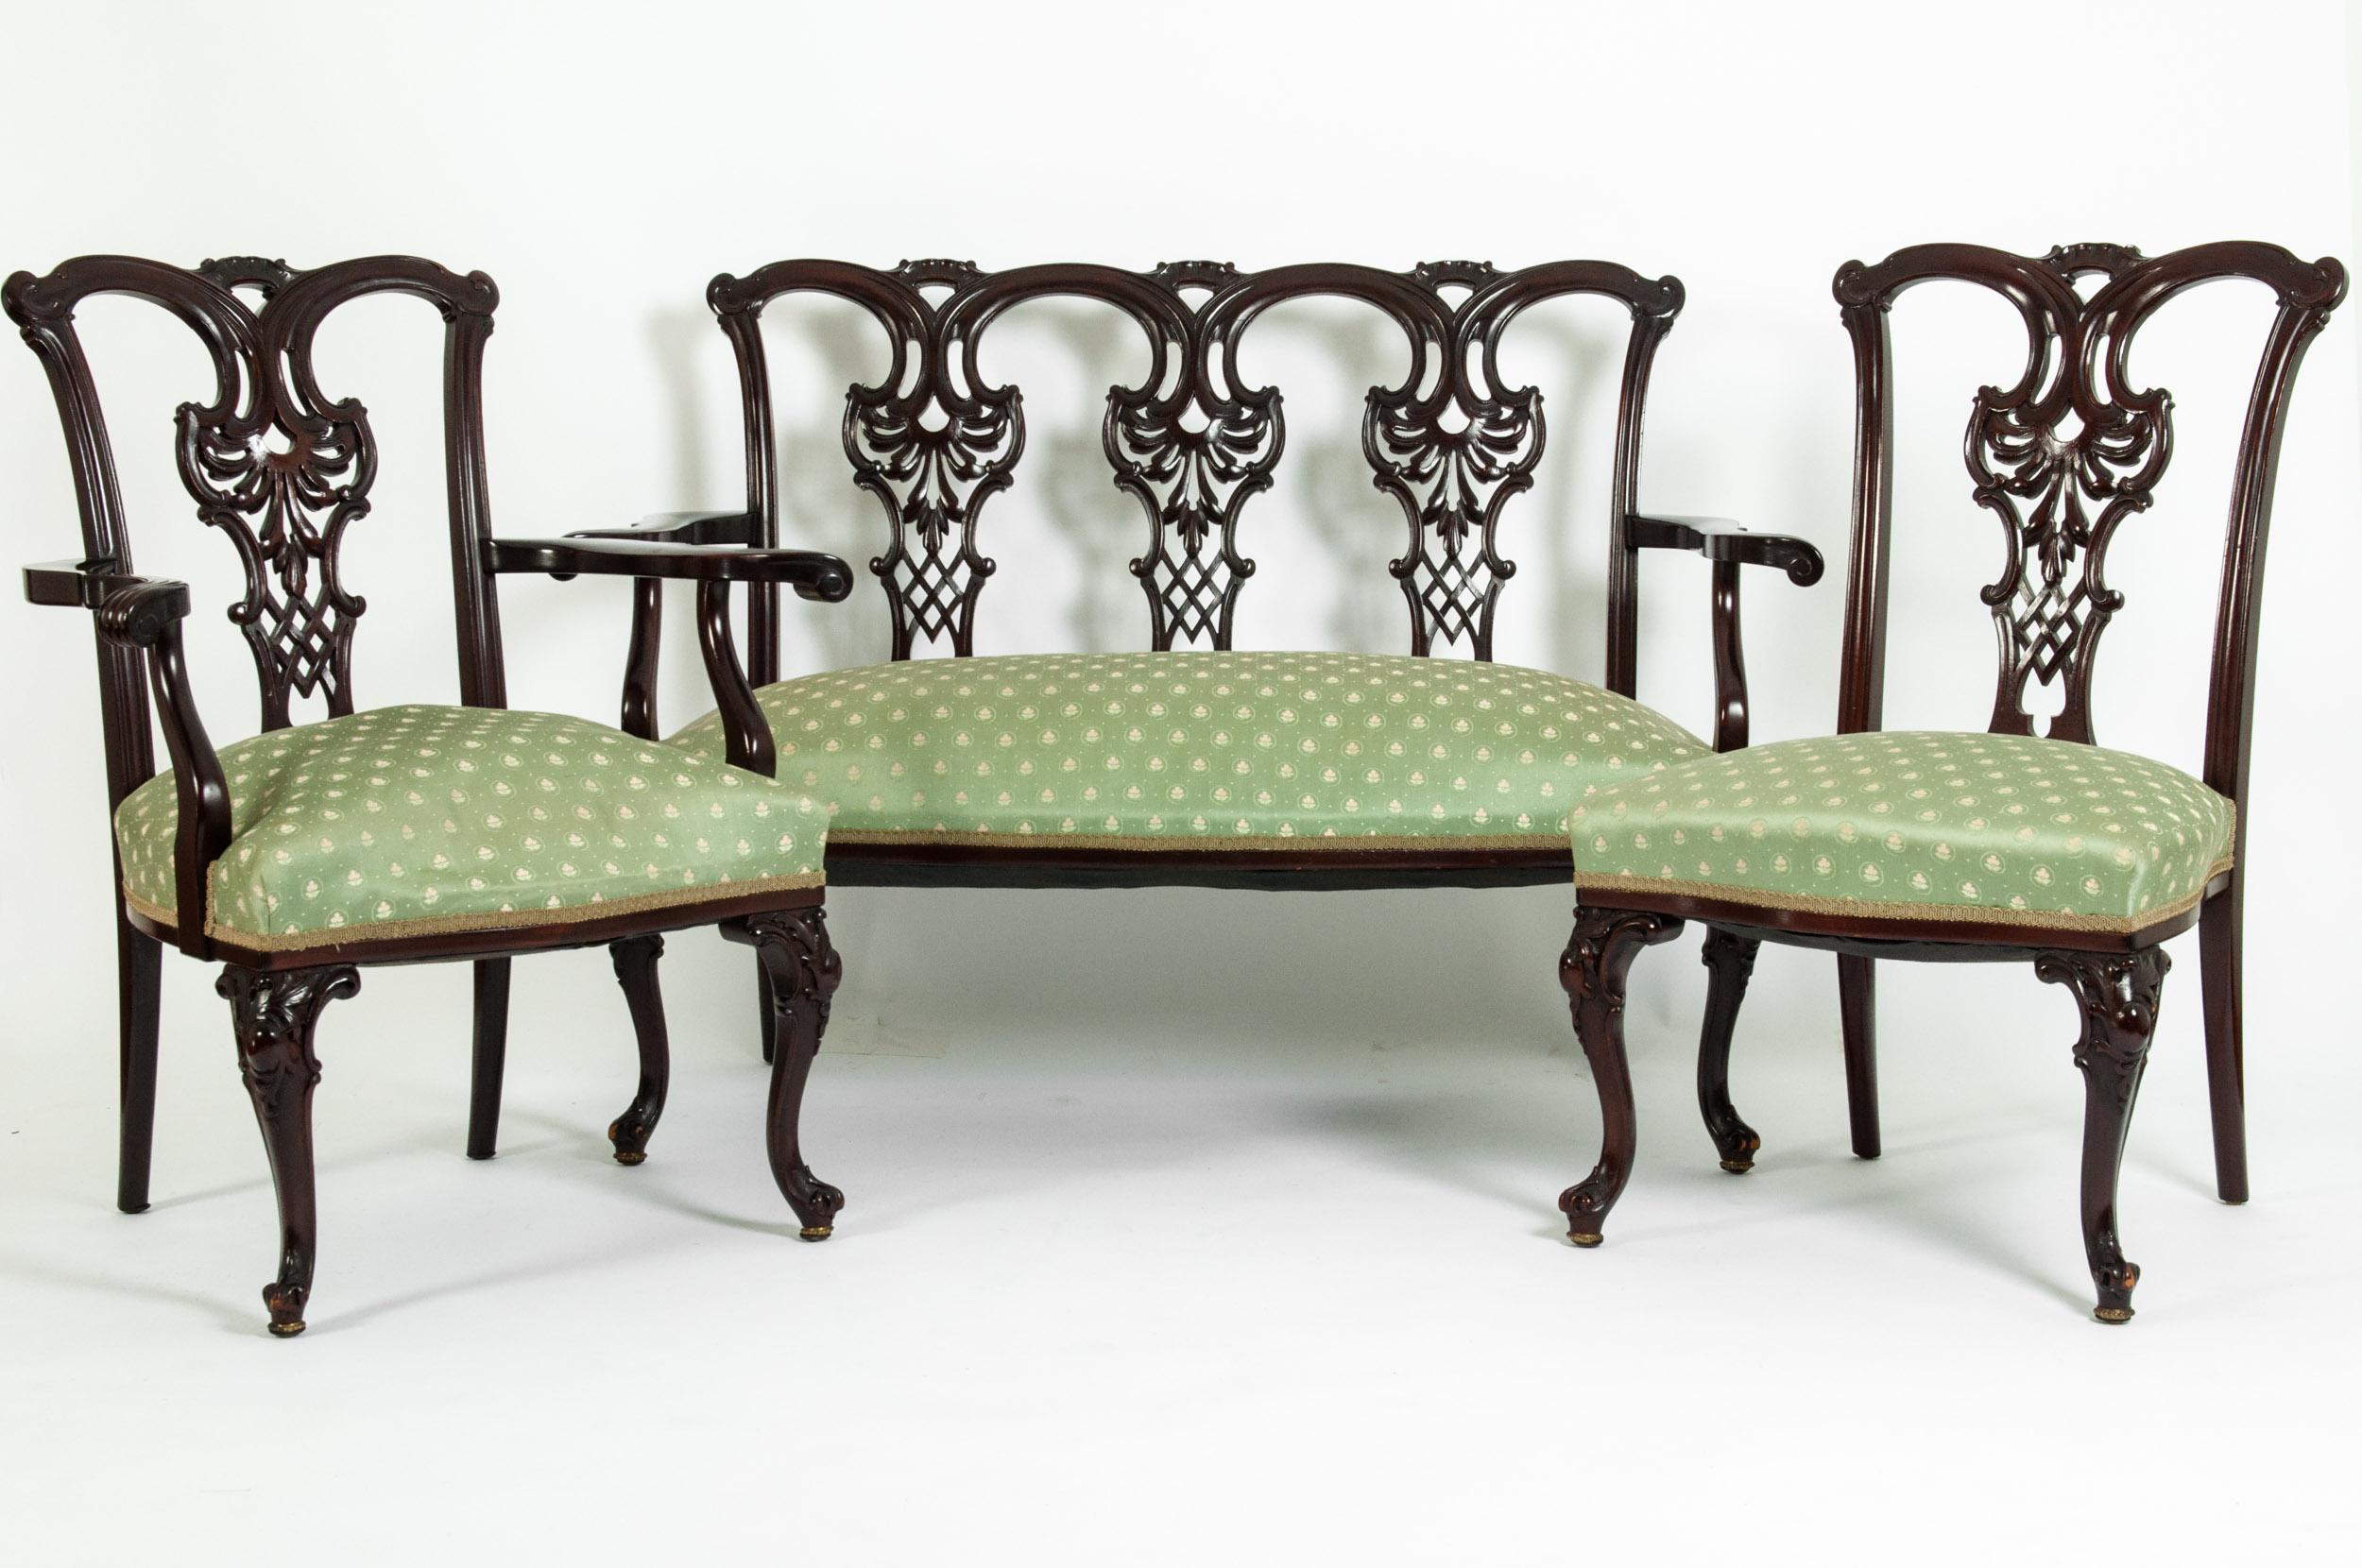 Early 19th century mahogany wood frame Chippendale style three-piece salon suite. The set include one settee, one armchair, one side chair. Each piece is very sturdy and in excellent antique condition with appropriate wear consistent with age.